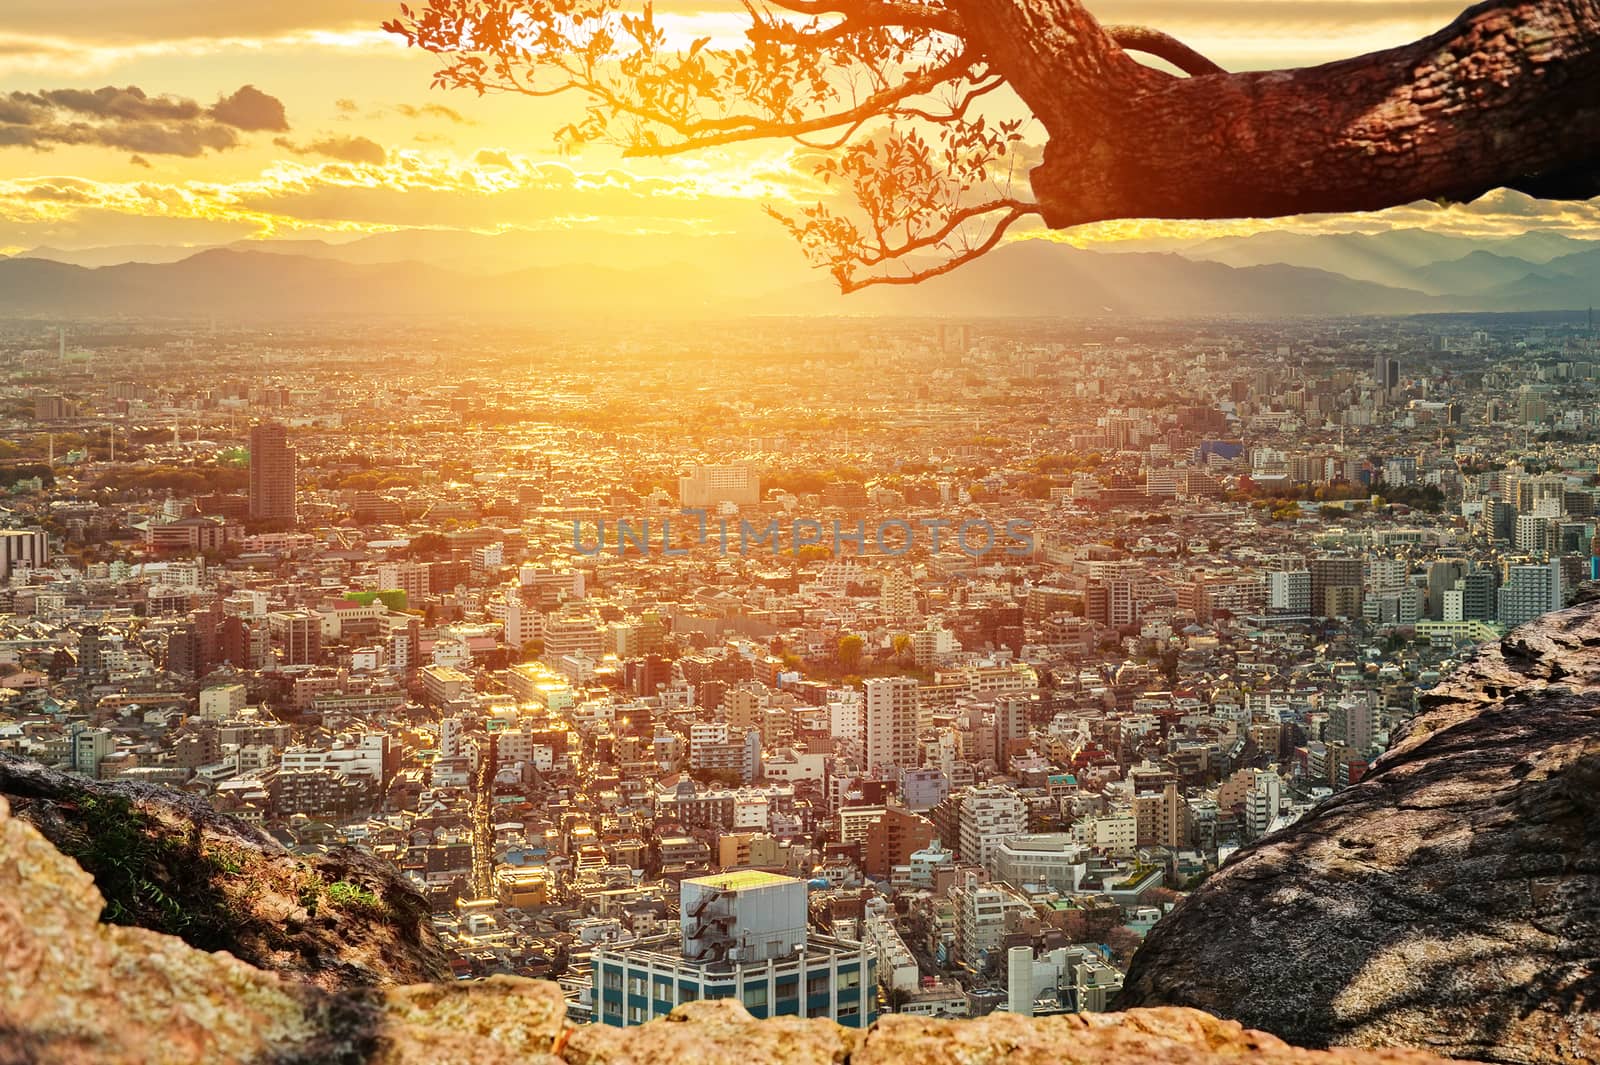 View City in Japan On High Mountain